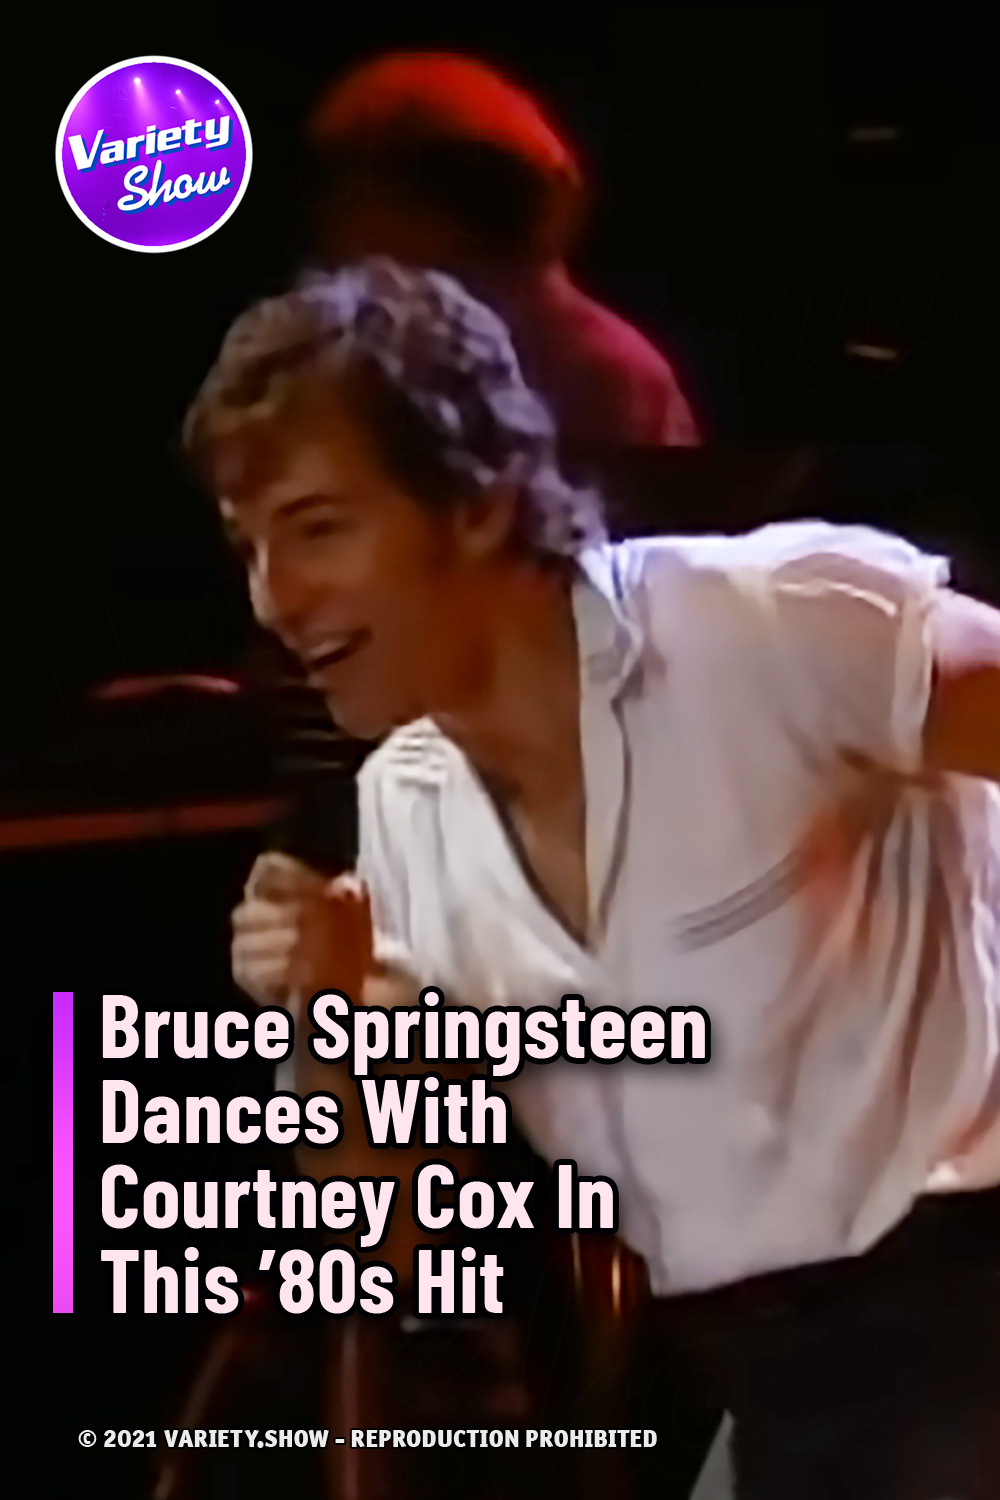 Bruce Springsteen Dances With Courtney Cox In This \'80s Hit